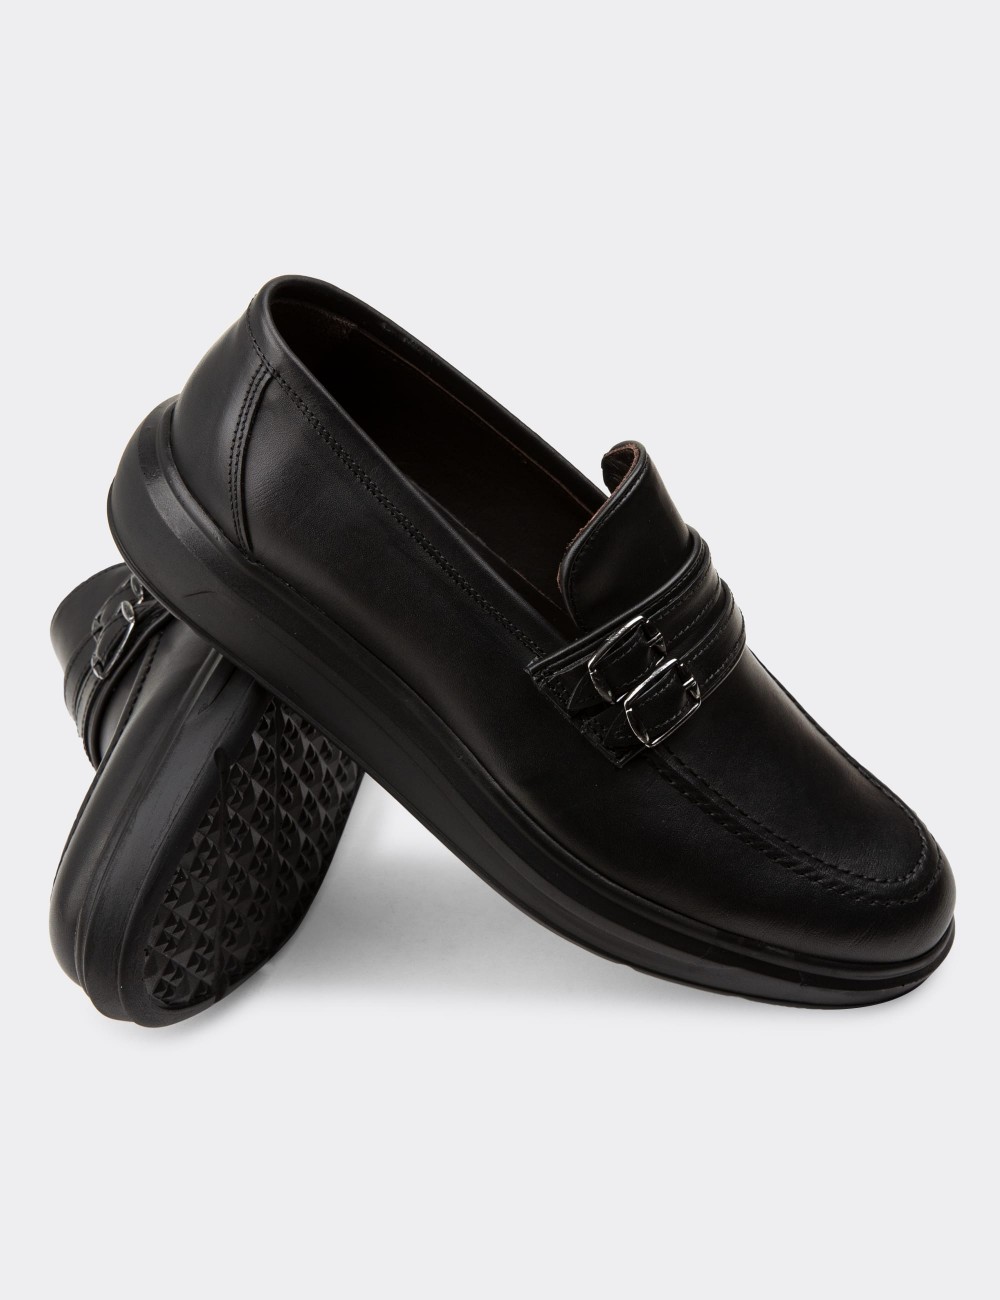 Black  Leather Loafers Shoes - 01925MSYHP01